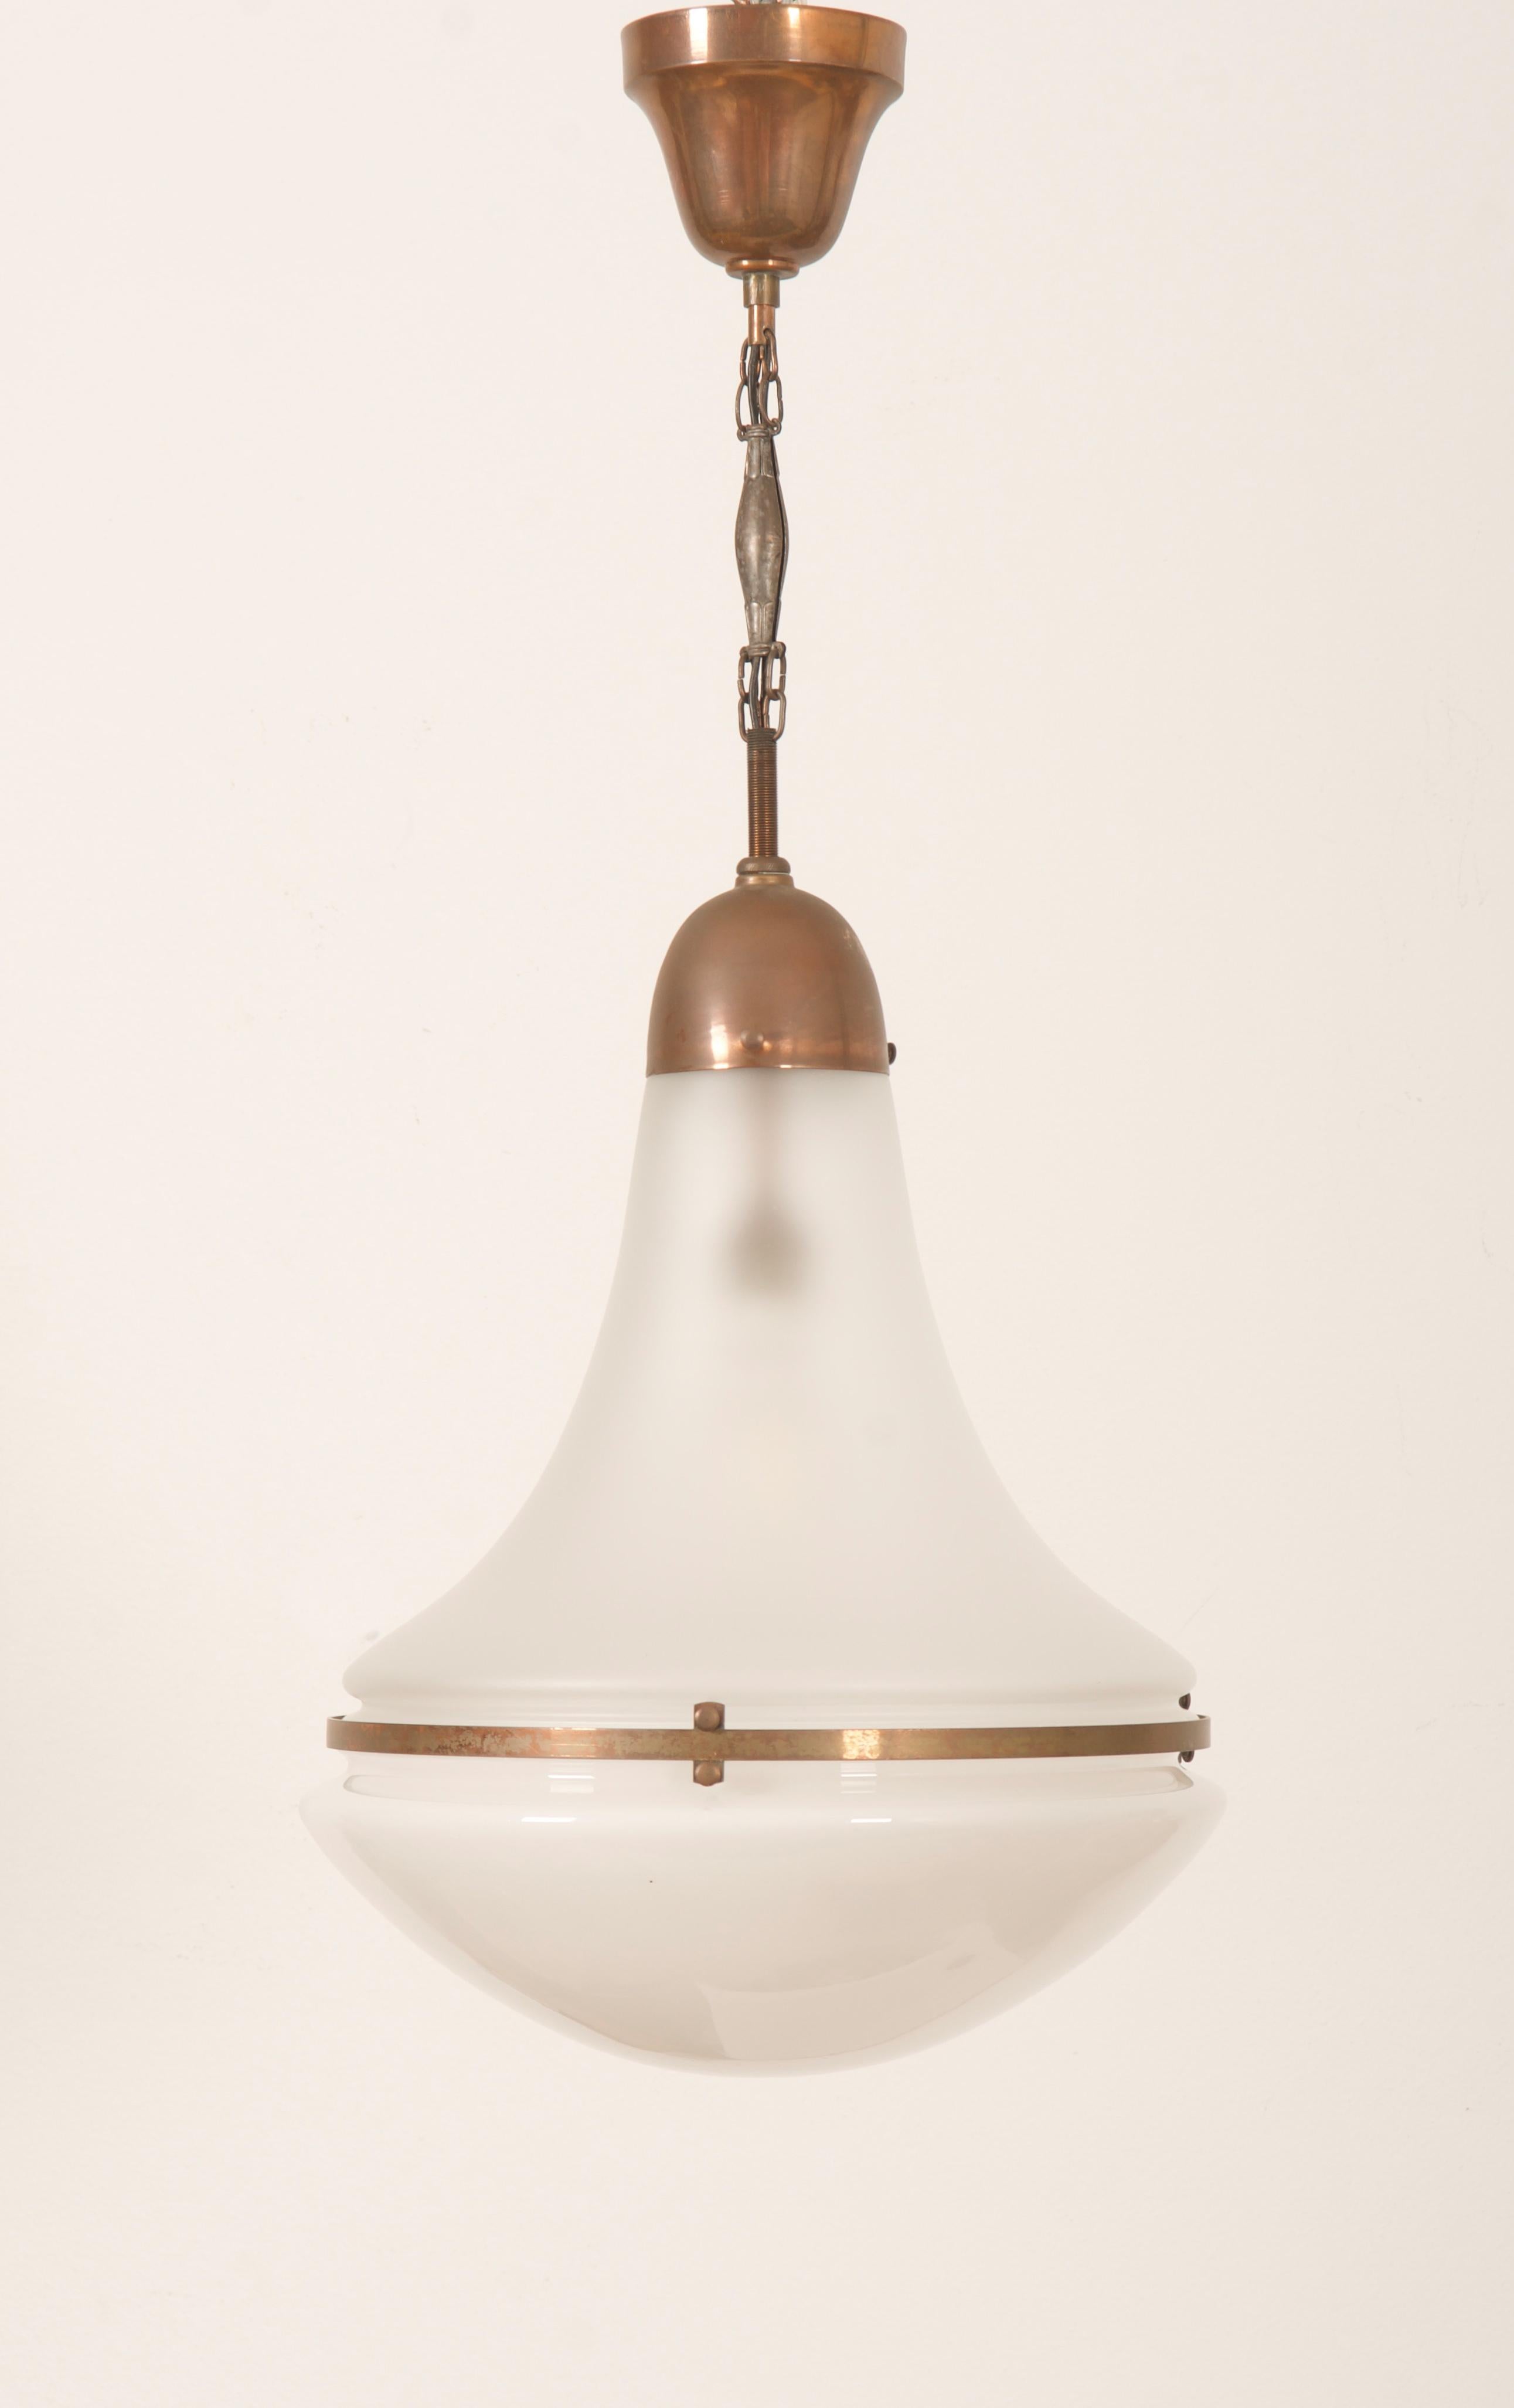 Peter Behrens Luzette pendant lamp from 1910-1920, frame in old copper and opaline/satined glass.
Beautiful and perfect original condition with E27 Socket.
 